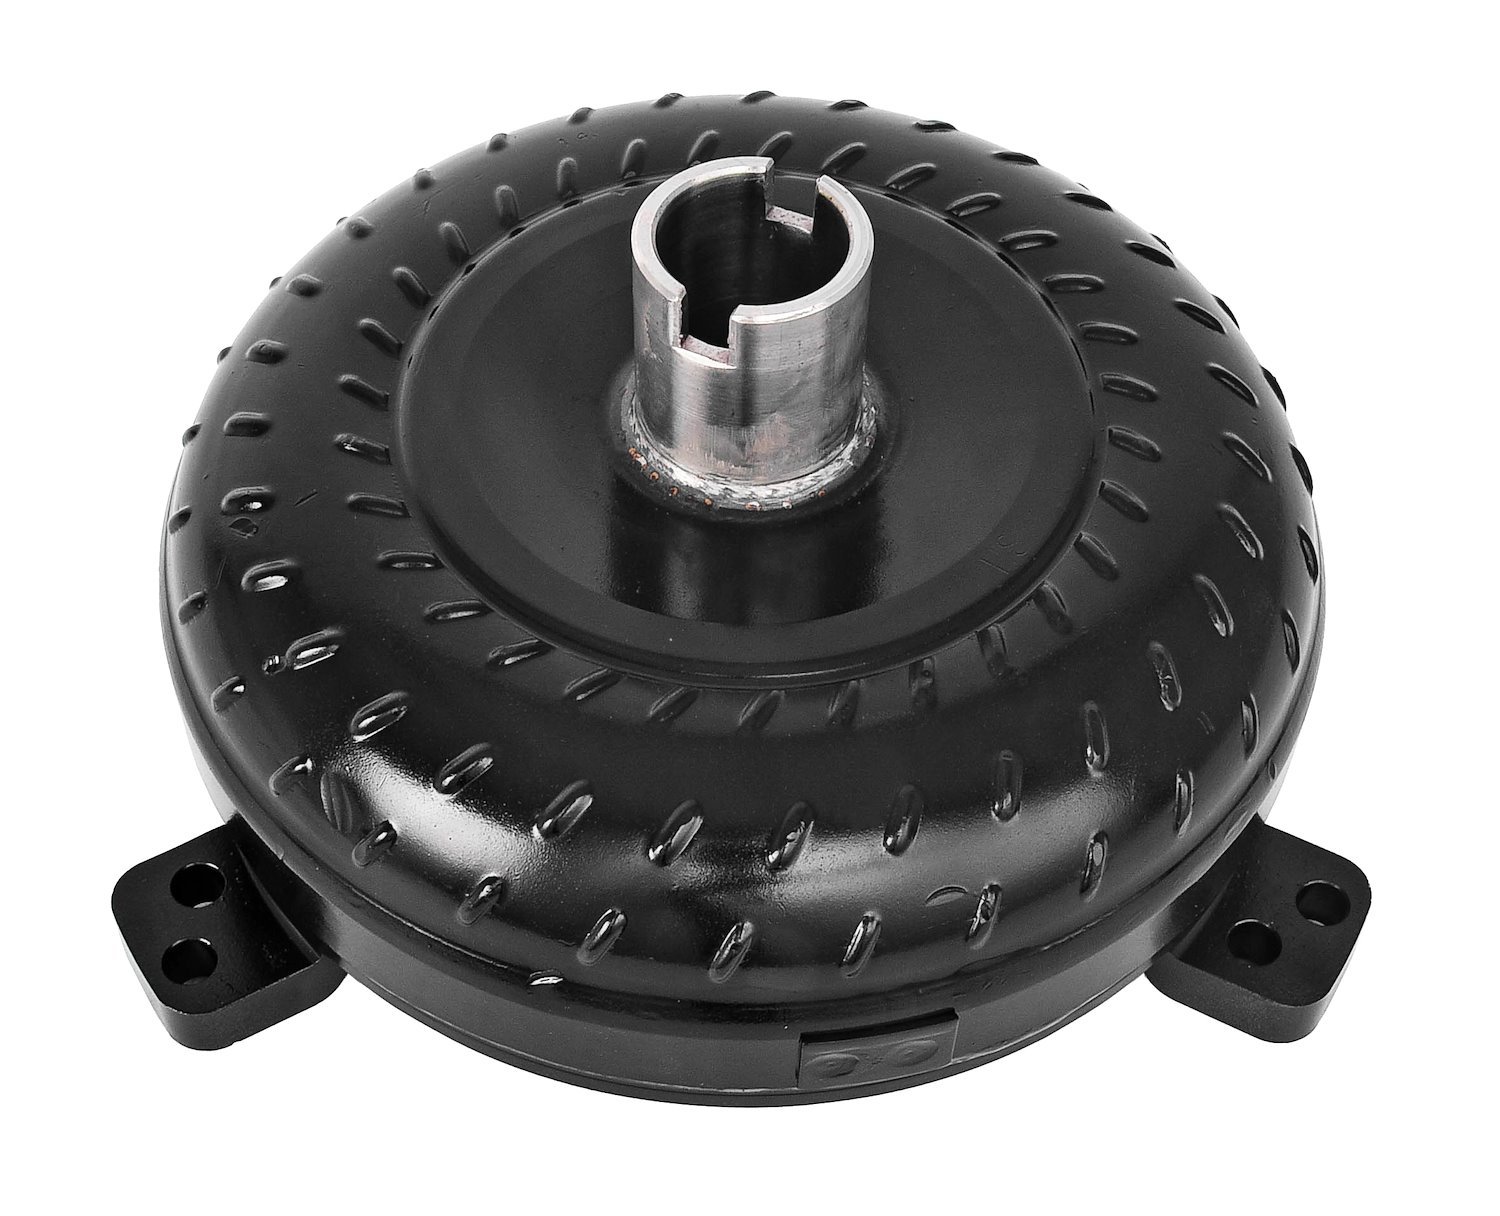 XHD Torque Converter for GM TH350, TH400, Powerglide [3800-4100 RPM Stall Speed],